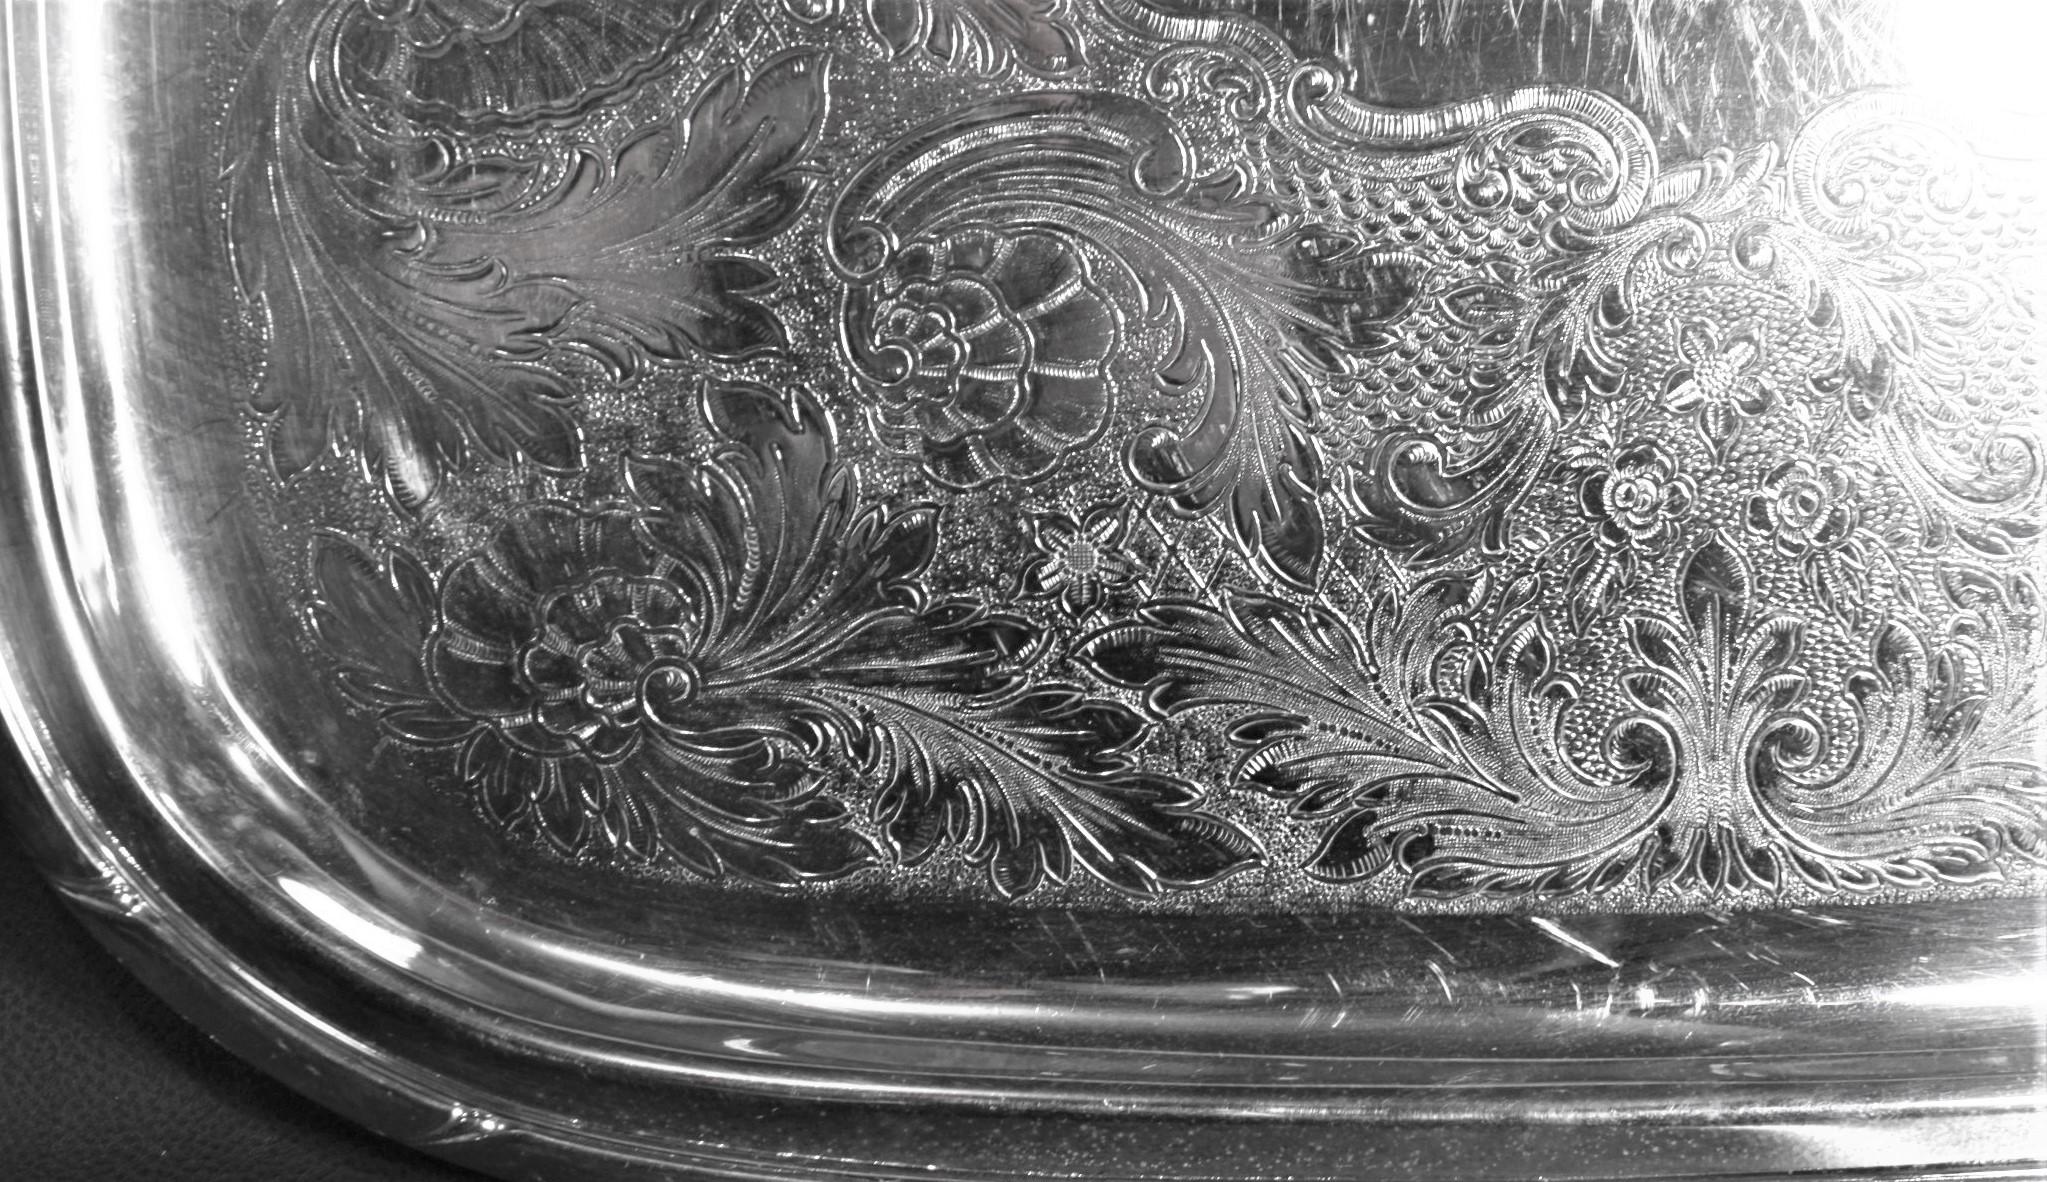 Rogers Antique Styled Silver Plated Engraved Serving Tray For Sale 1